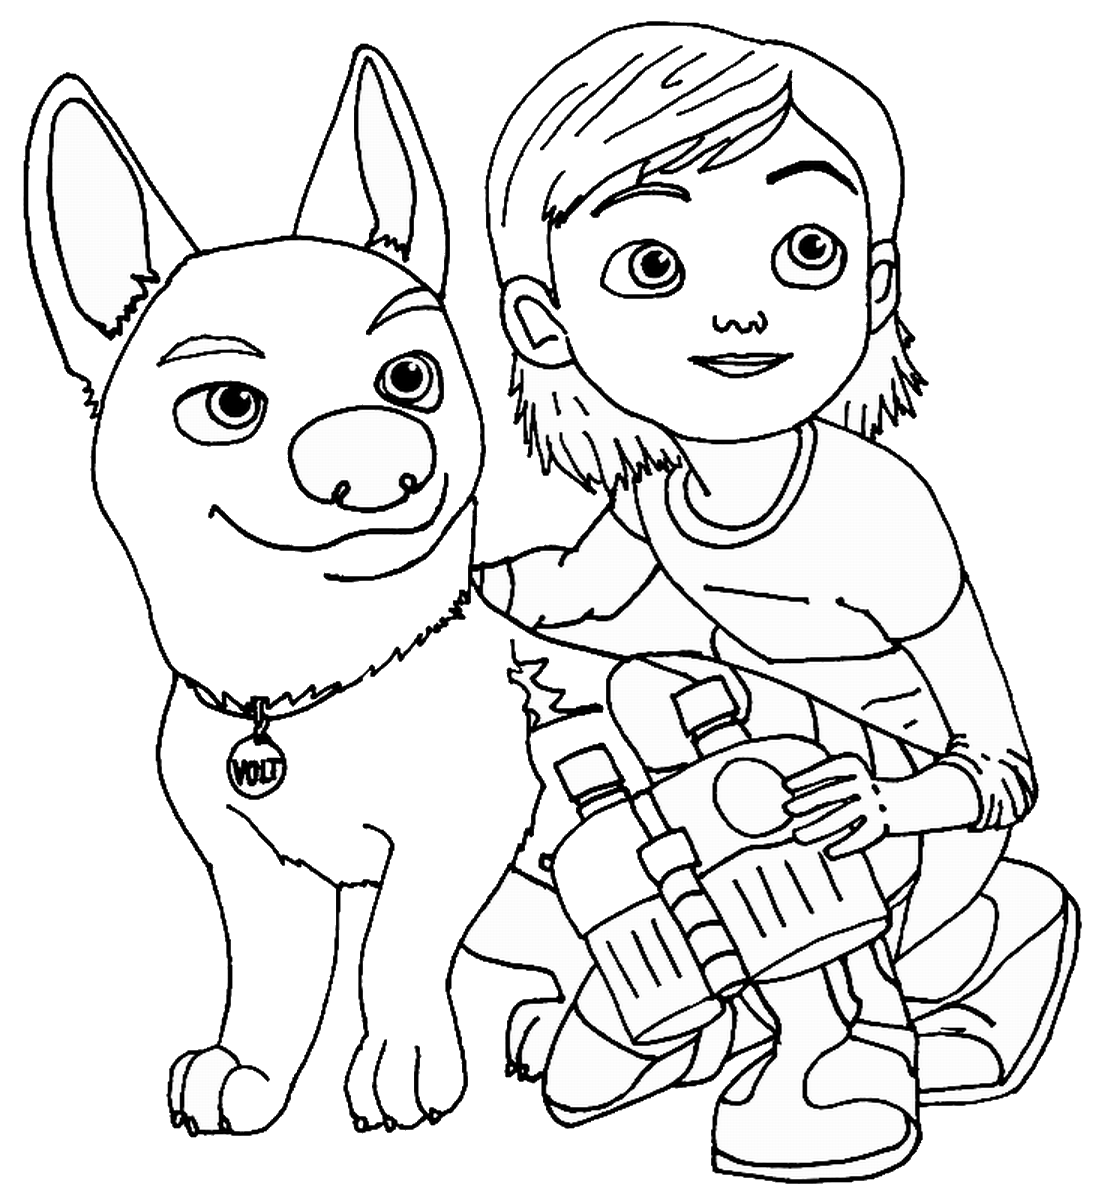 Bolt Coloring Pages TV Film bolt_cl_04 Printable 2020 01165 Coloring4free